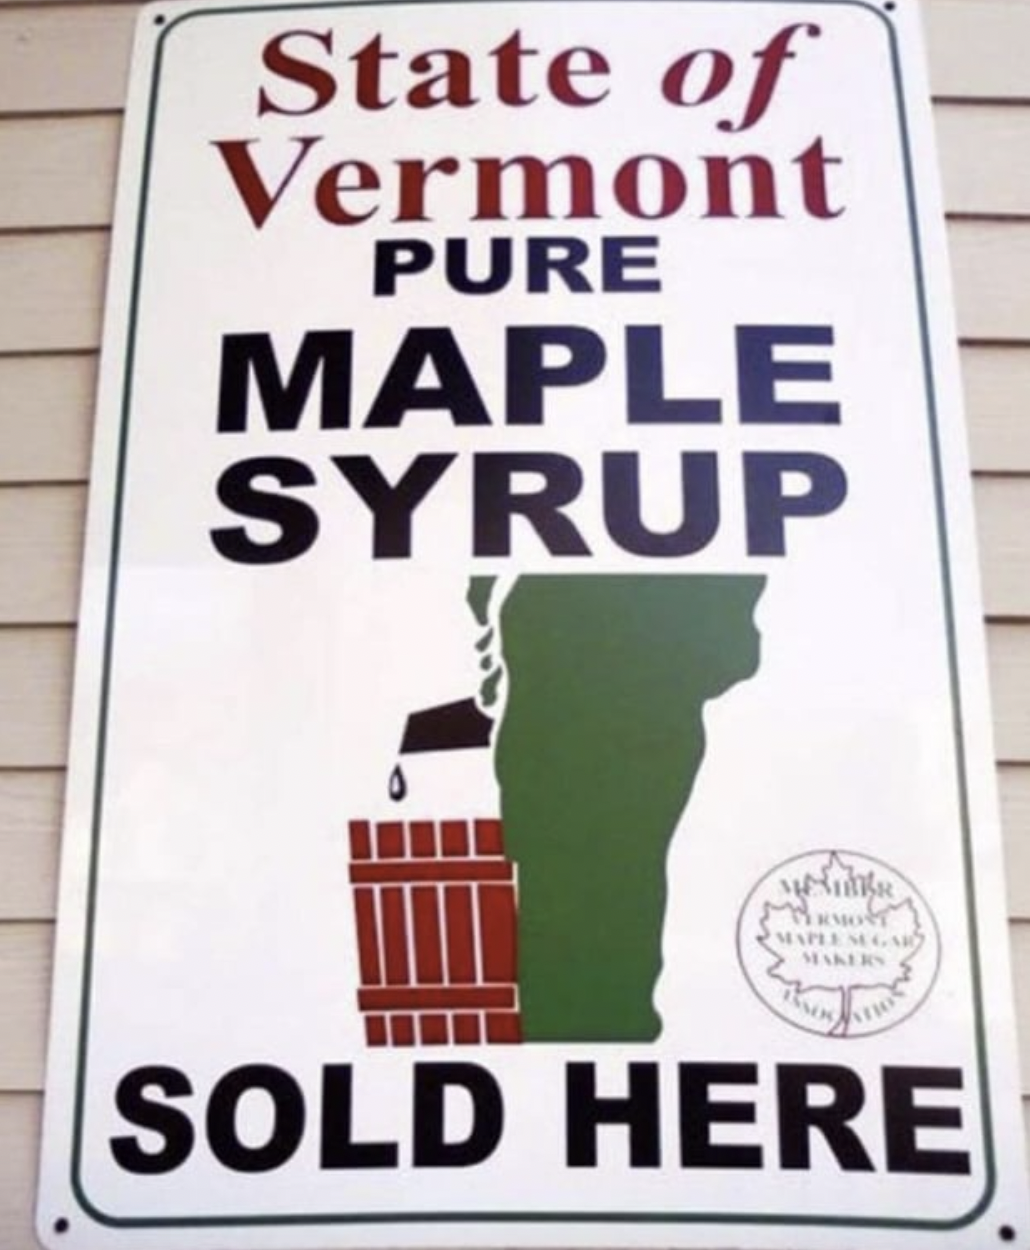 facepalms - state of vermont maple syrup logo - State of Vermont Pure Maple Syrup Wun Meakers Sold Here